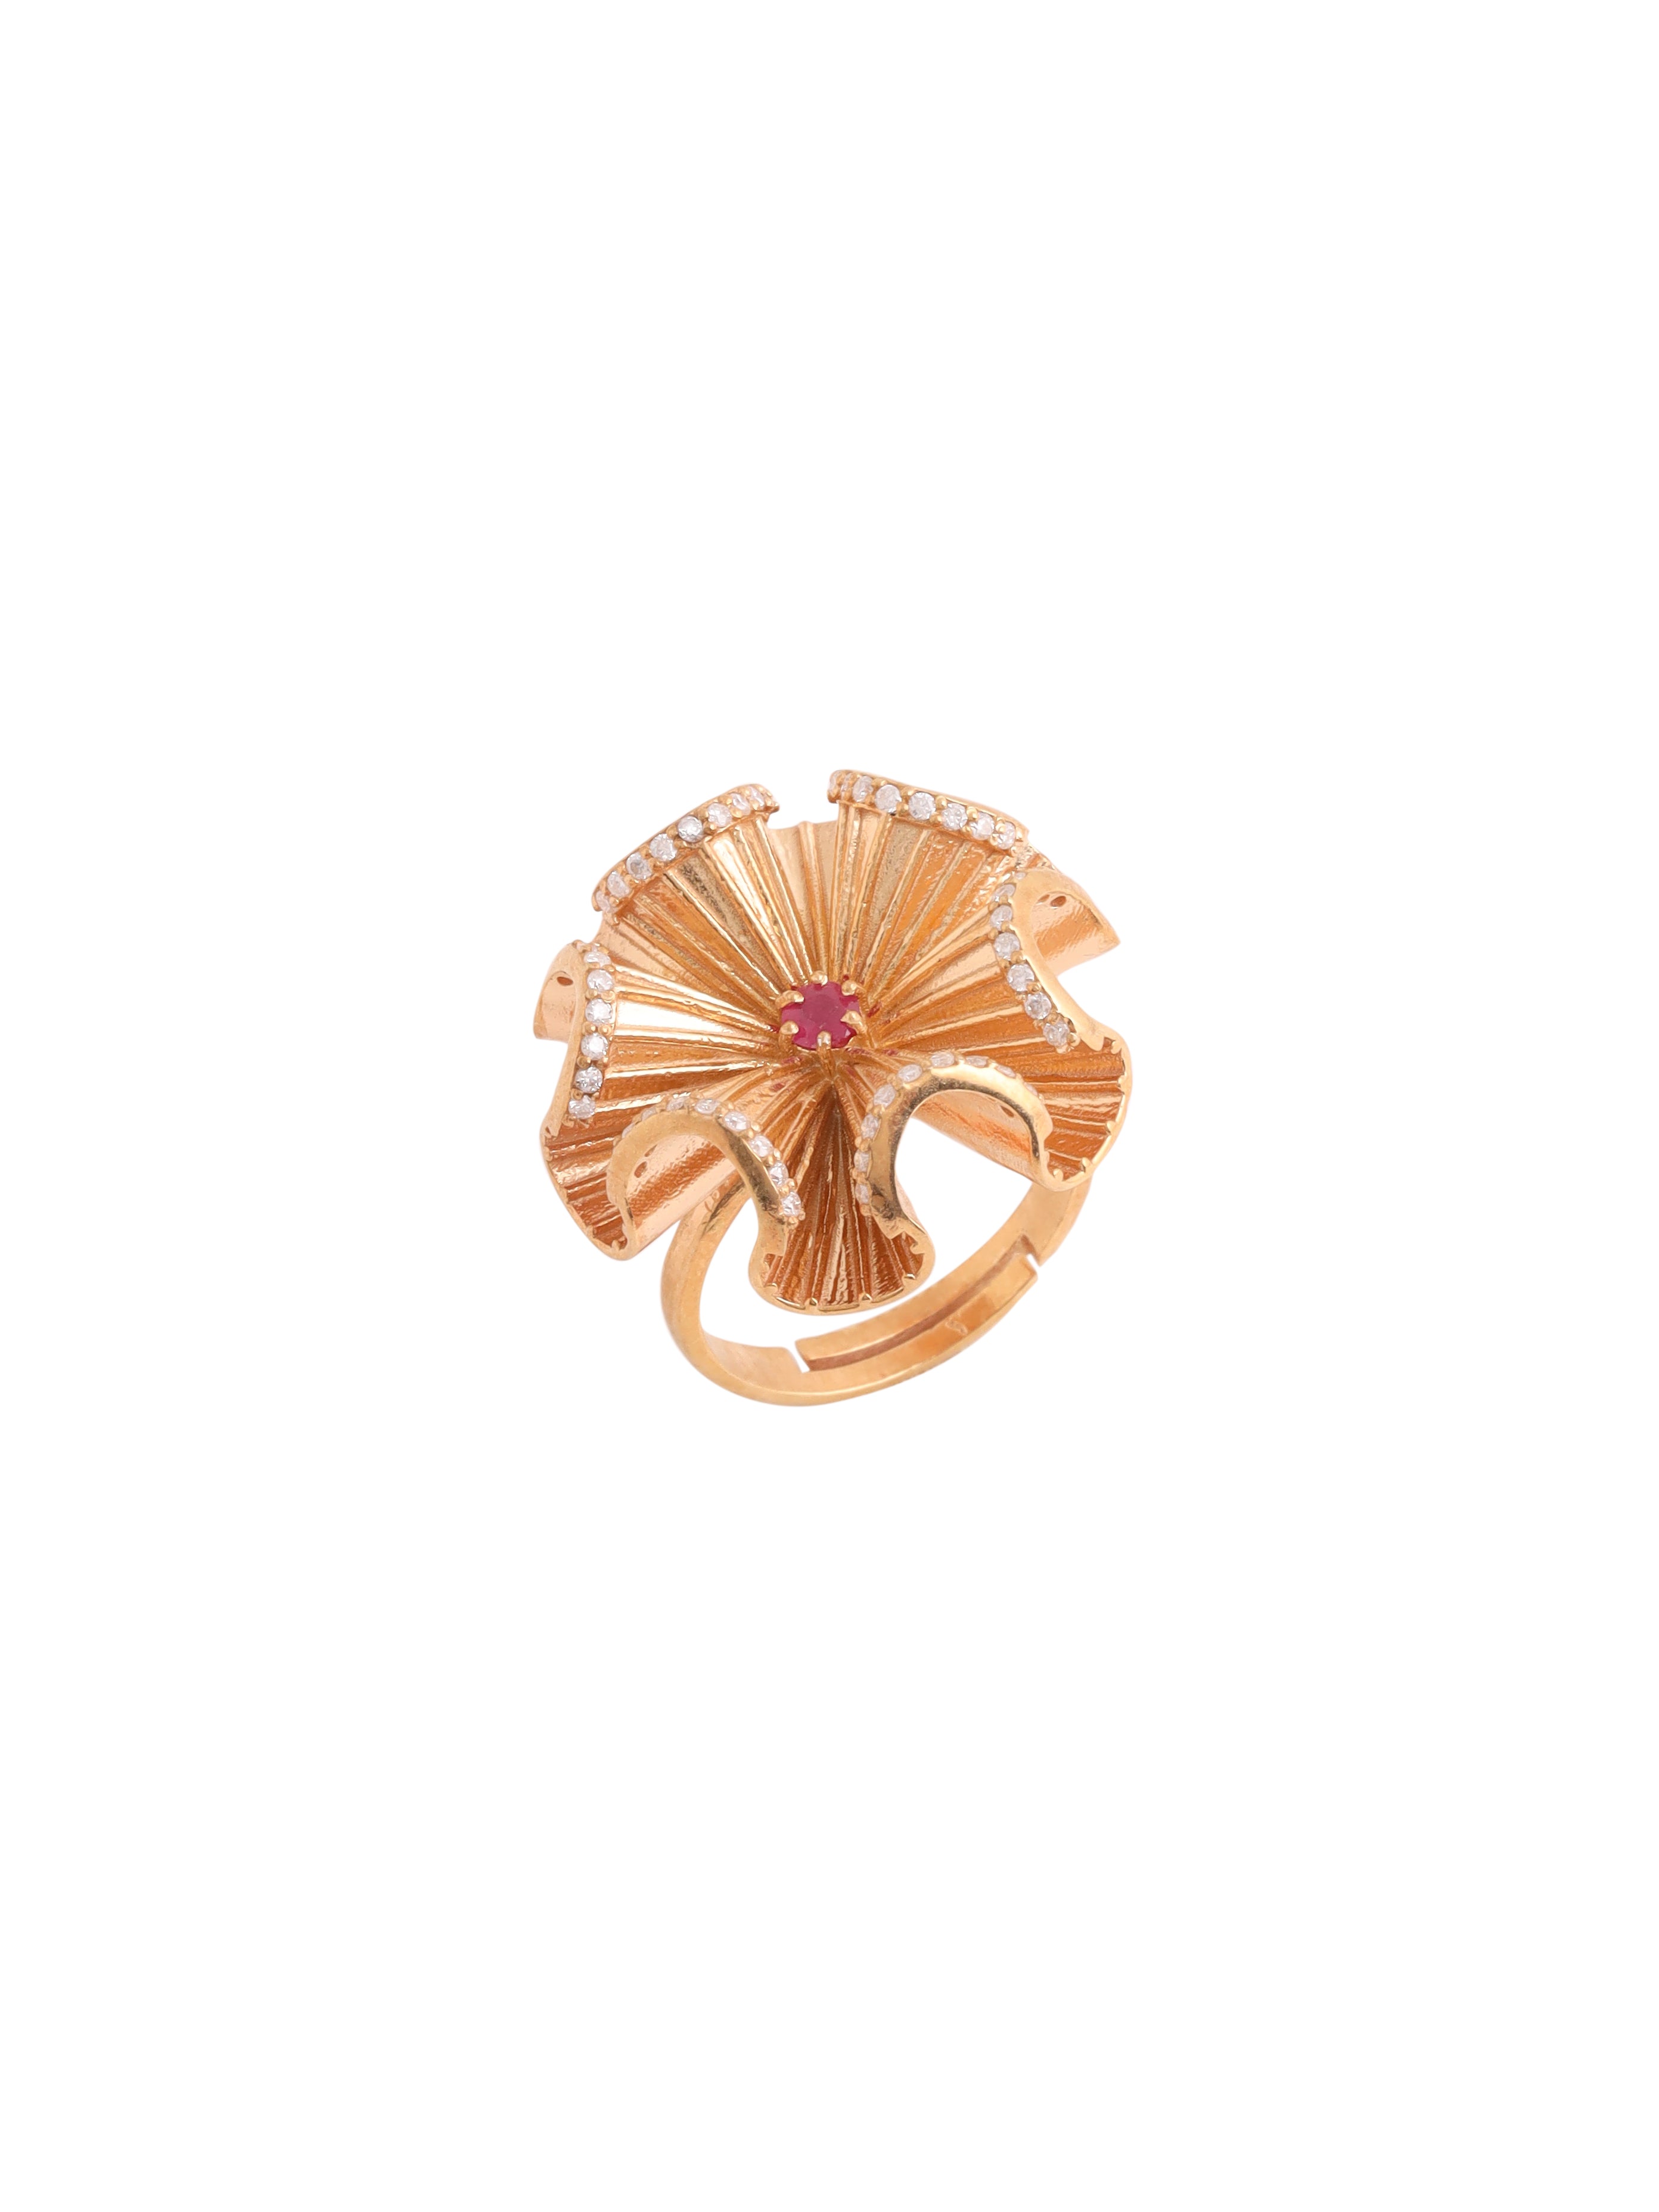 Kicky and Perky 925 Sterling silver Rose Gold Precious Ruby & Mossanite Frill Flower Adjustable Ring for Women